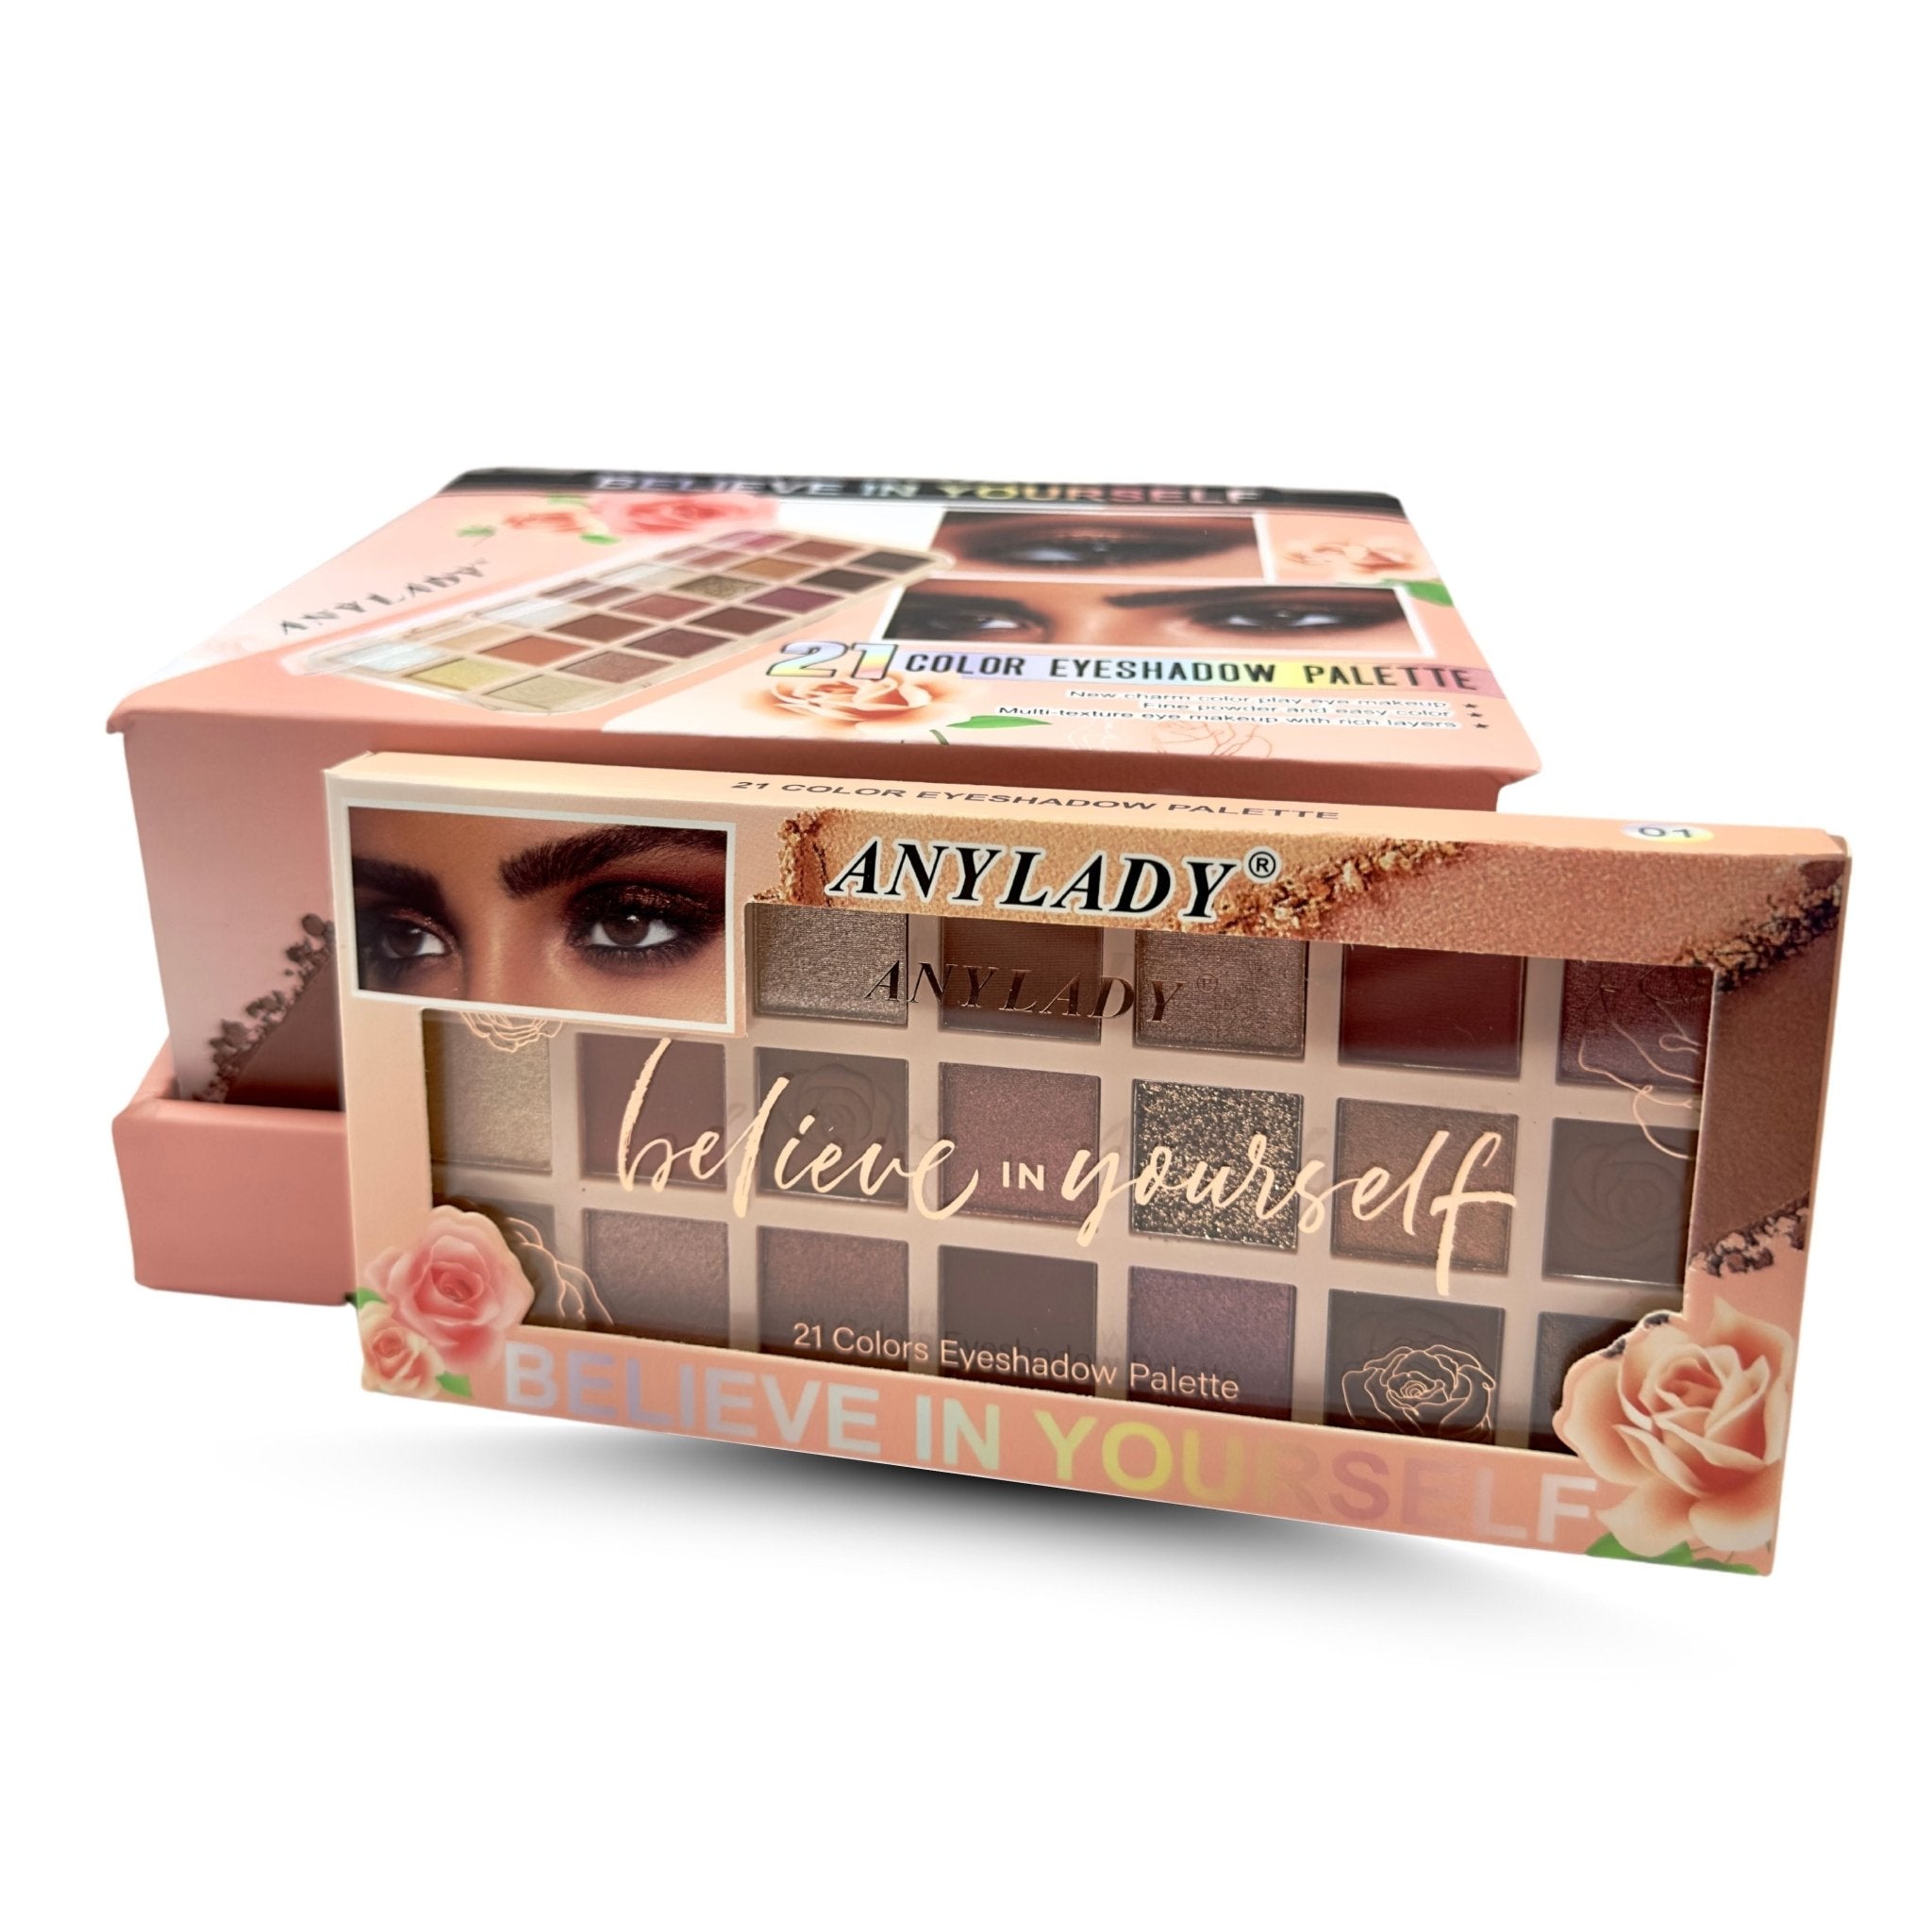 Sombra para Ojos Anylady Believe in yourselve - AjSiles8166-01#